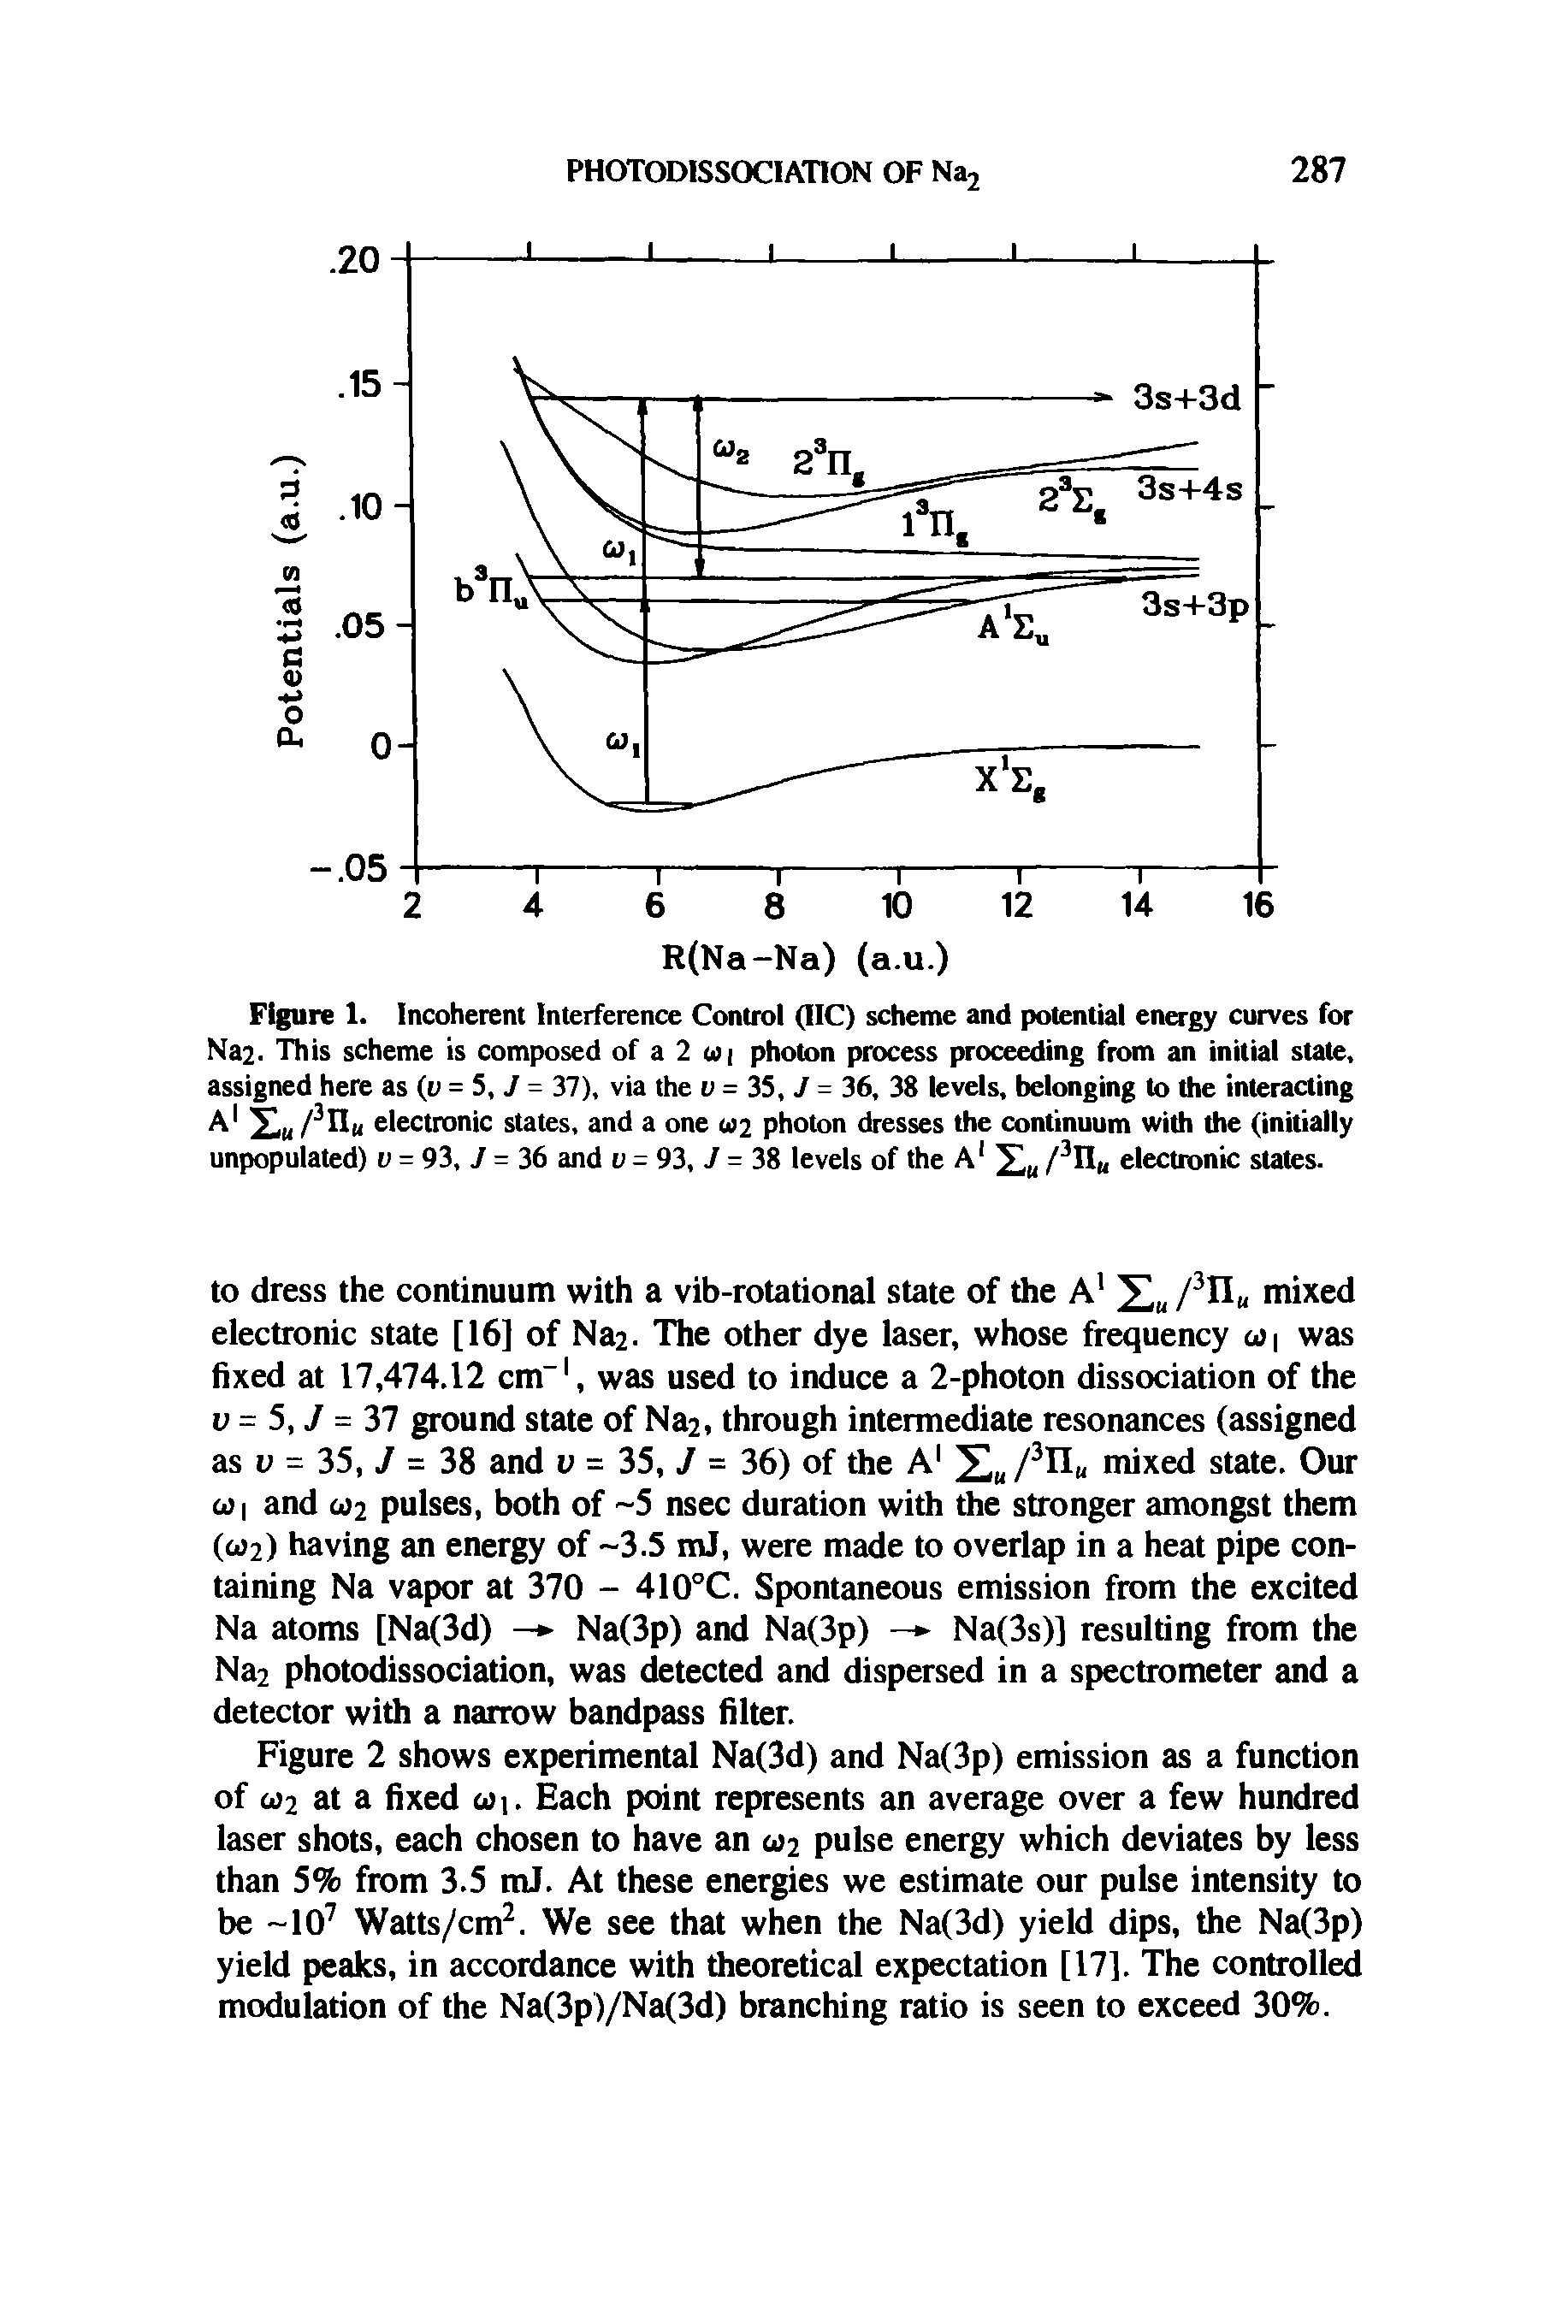 Figure 1. Incoherent Interference Control (IIC) scheme and potential energy curves for Na2- This scheme is composed of a 2 wi photon process proceeding from an initial state, assigned here as (v = 5, J = 37), via the u = 35, J = 36, 38 levels, belonging to the interacting A1 Xu /3nu electronic states, and a one 2 photon dresses the continuum with the (initially unpopulated) v = 93, J = 36 and v = 93, J = 38 levels of the A1 Xu /3H electronic states.